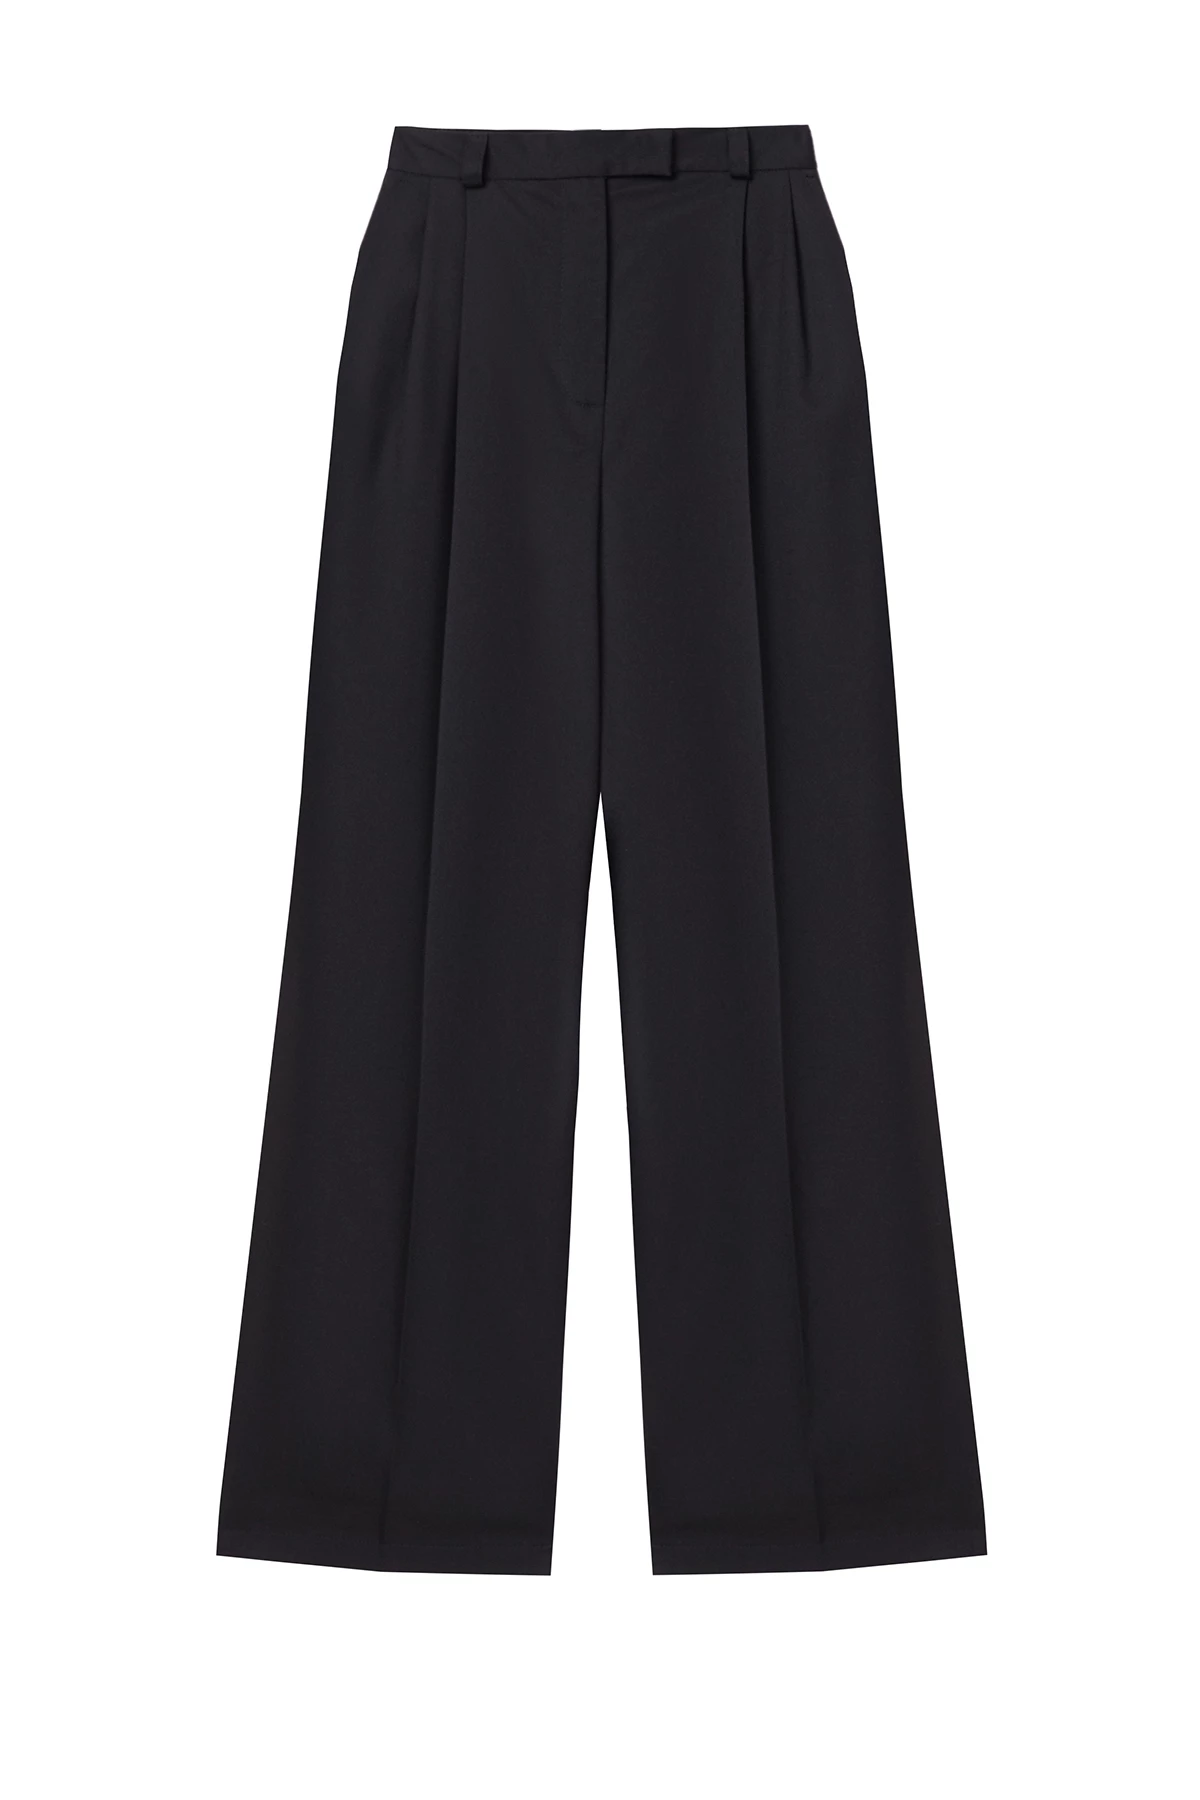 Black loose fit pants made of viscose suit fabric, photo 6